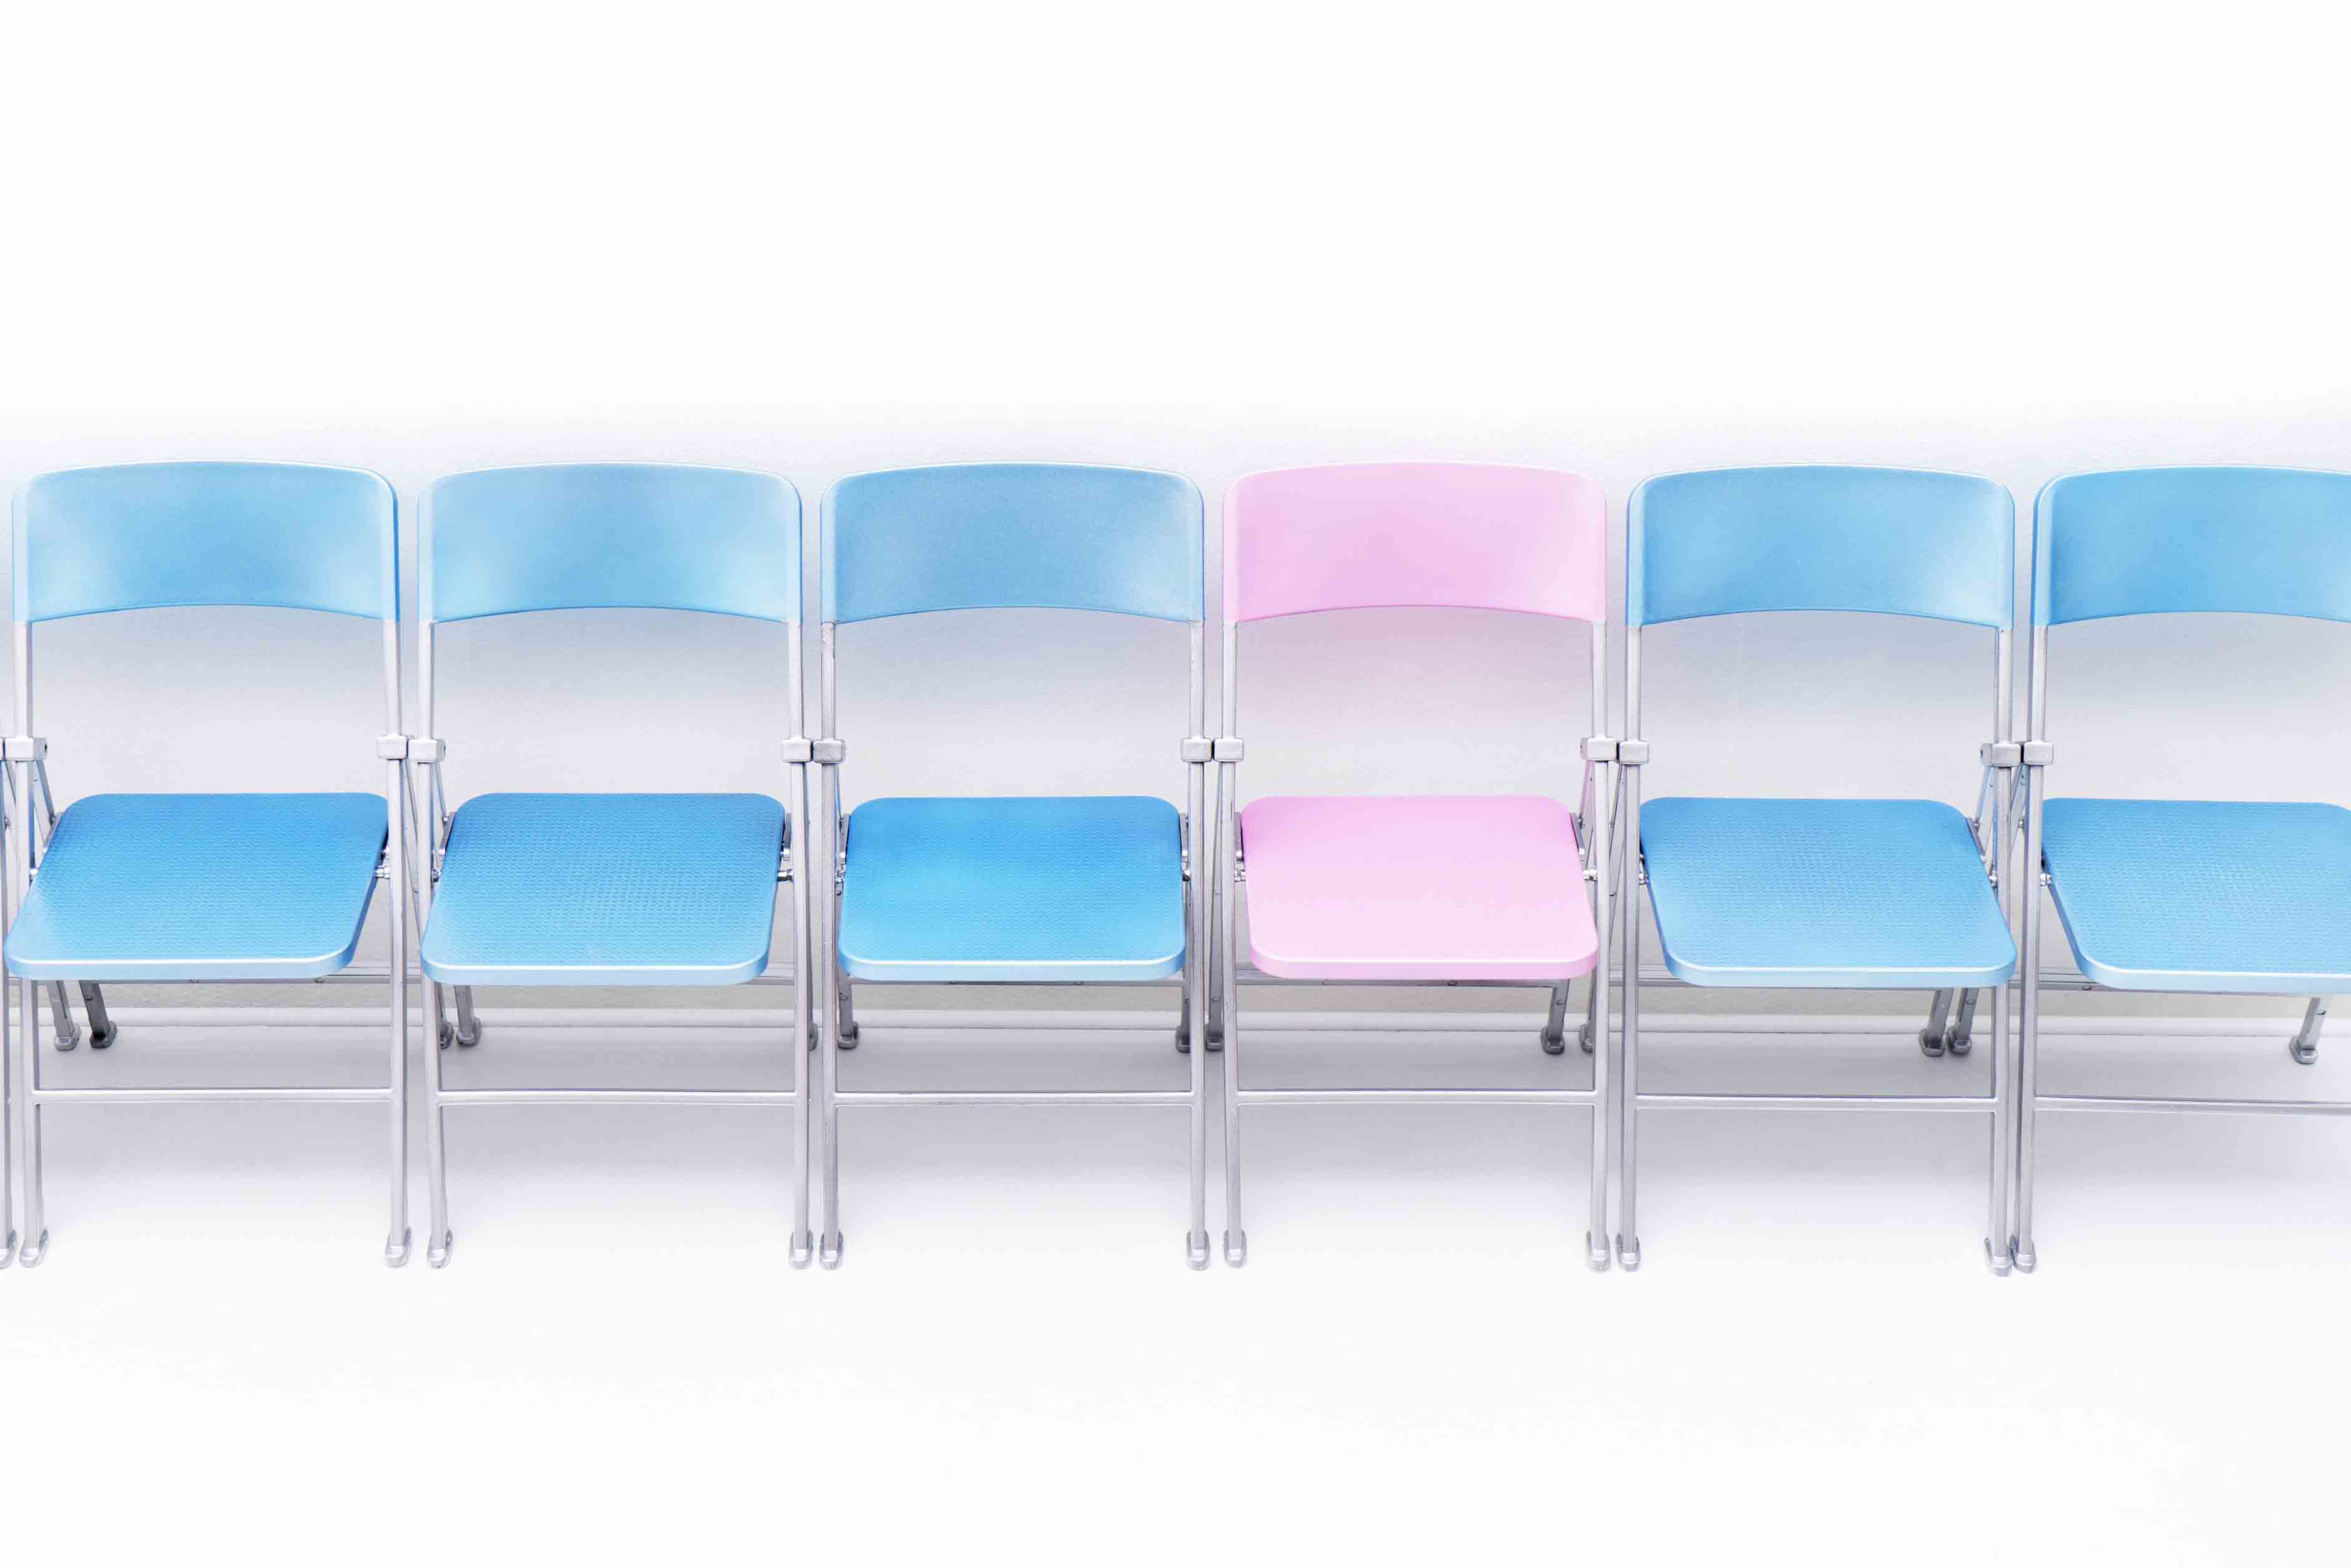 679-08718348 © Masterfile Royalty-Free Model Release: No Property Release: No One pink chair in a row of blue chairs.